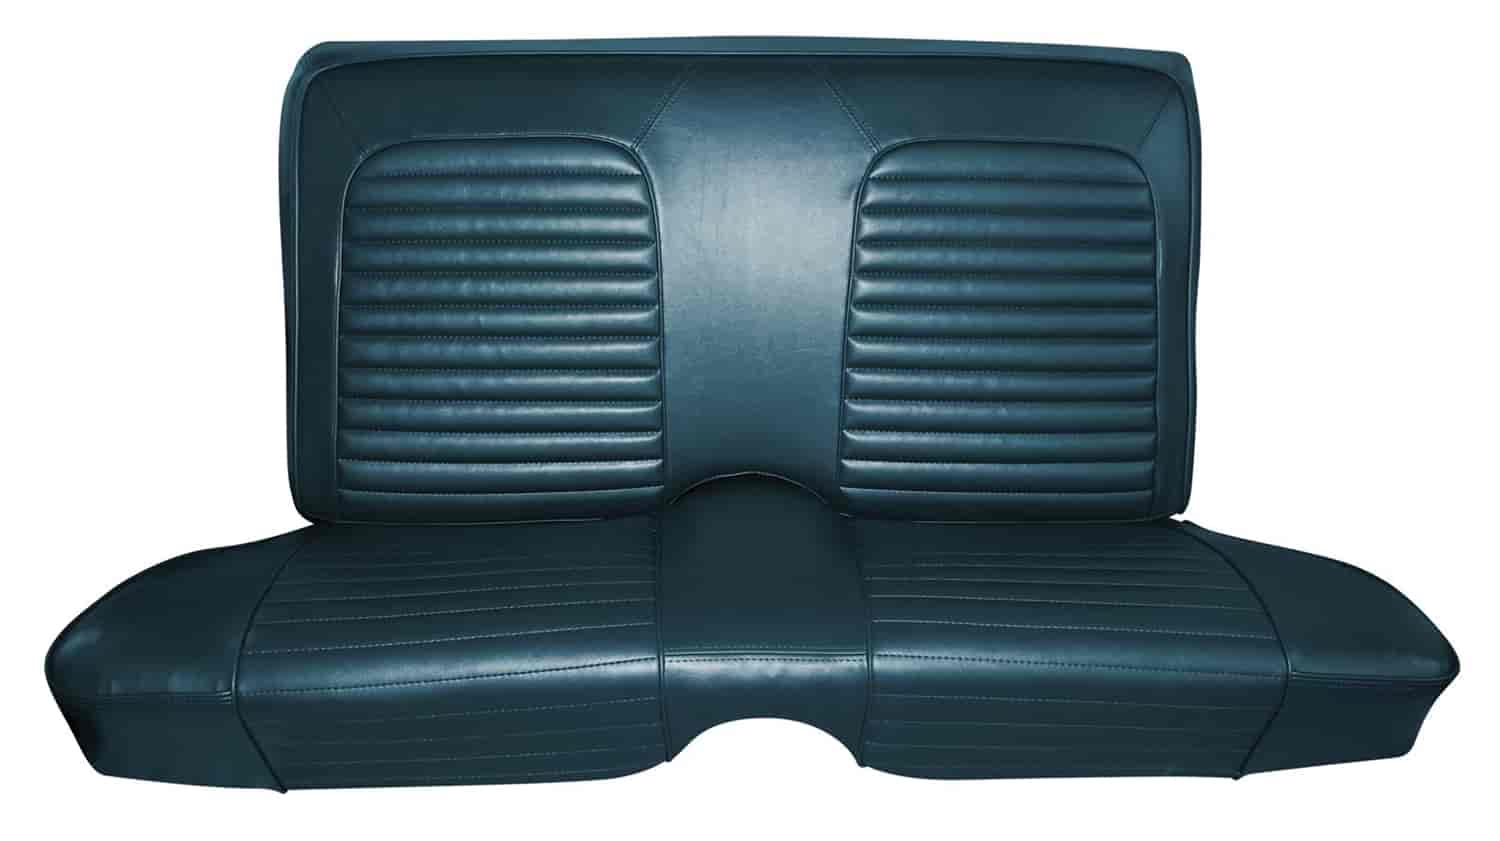 1961-1962 Ford Falcon Futura Standard Interior Front Bucket and Rear Bench Seat Upholstery Set